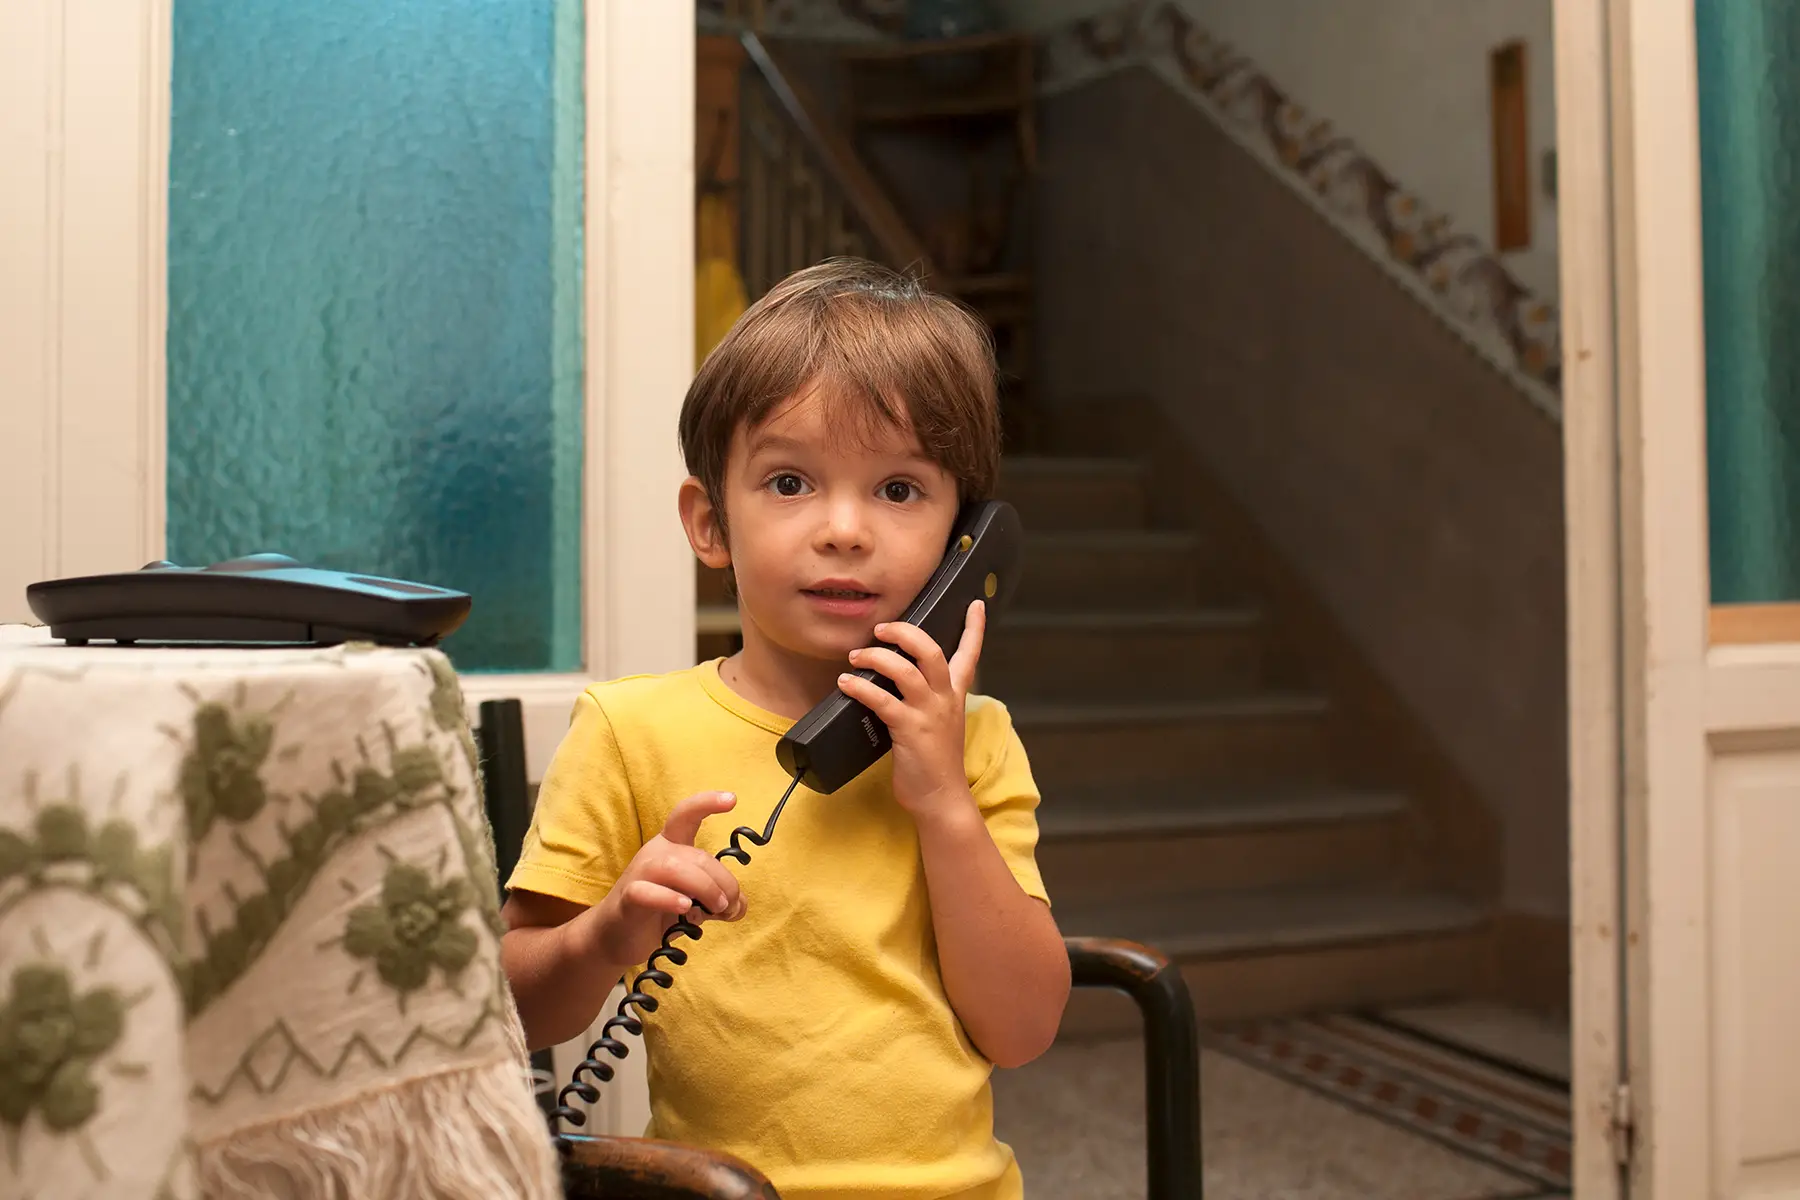 A young boy making a call on a landline phone in his living room